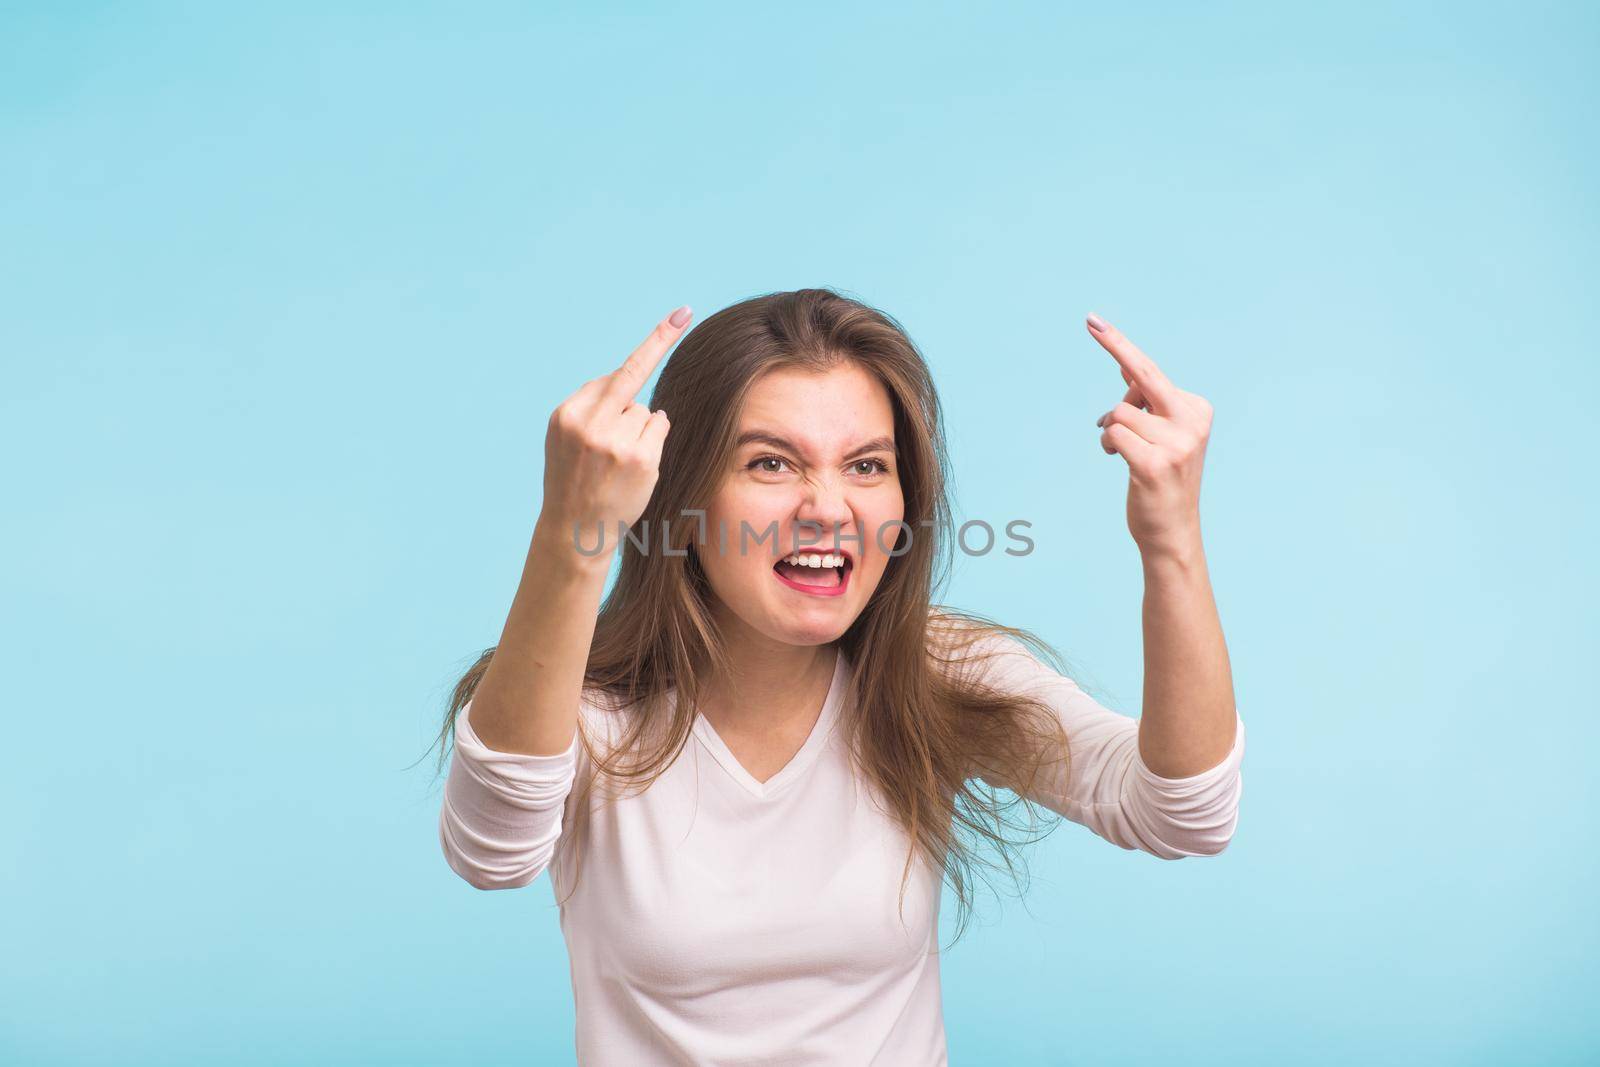 Angry aggressive woman with ferocious expression on blue background by Satura86